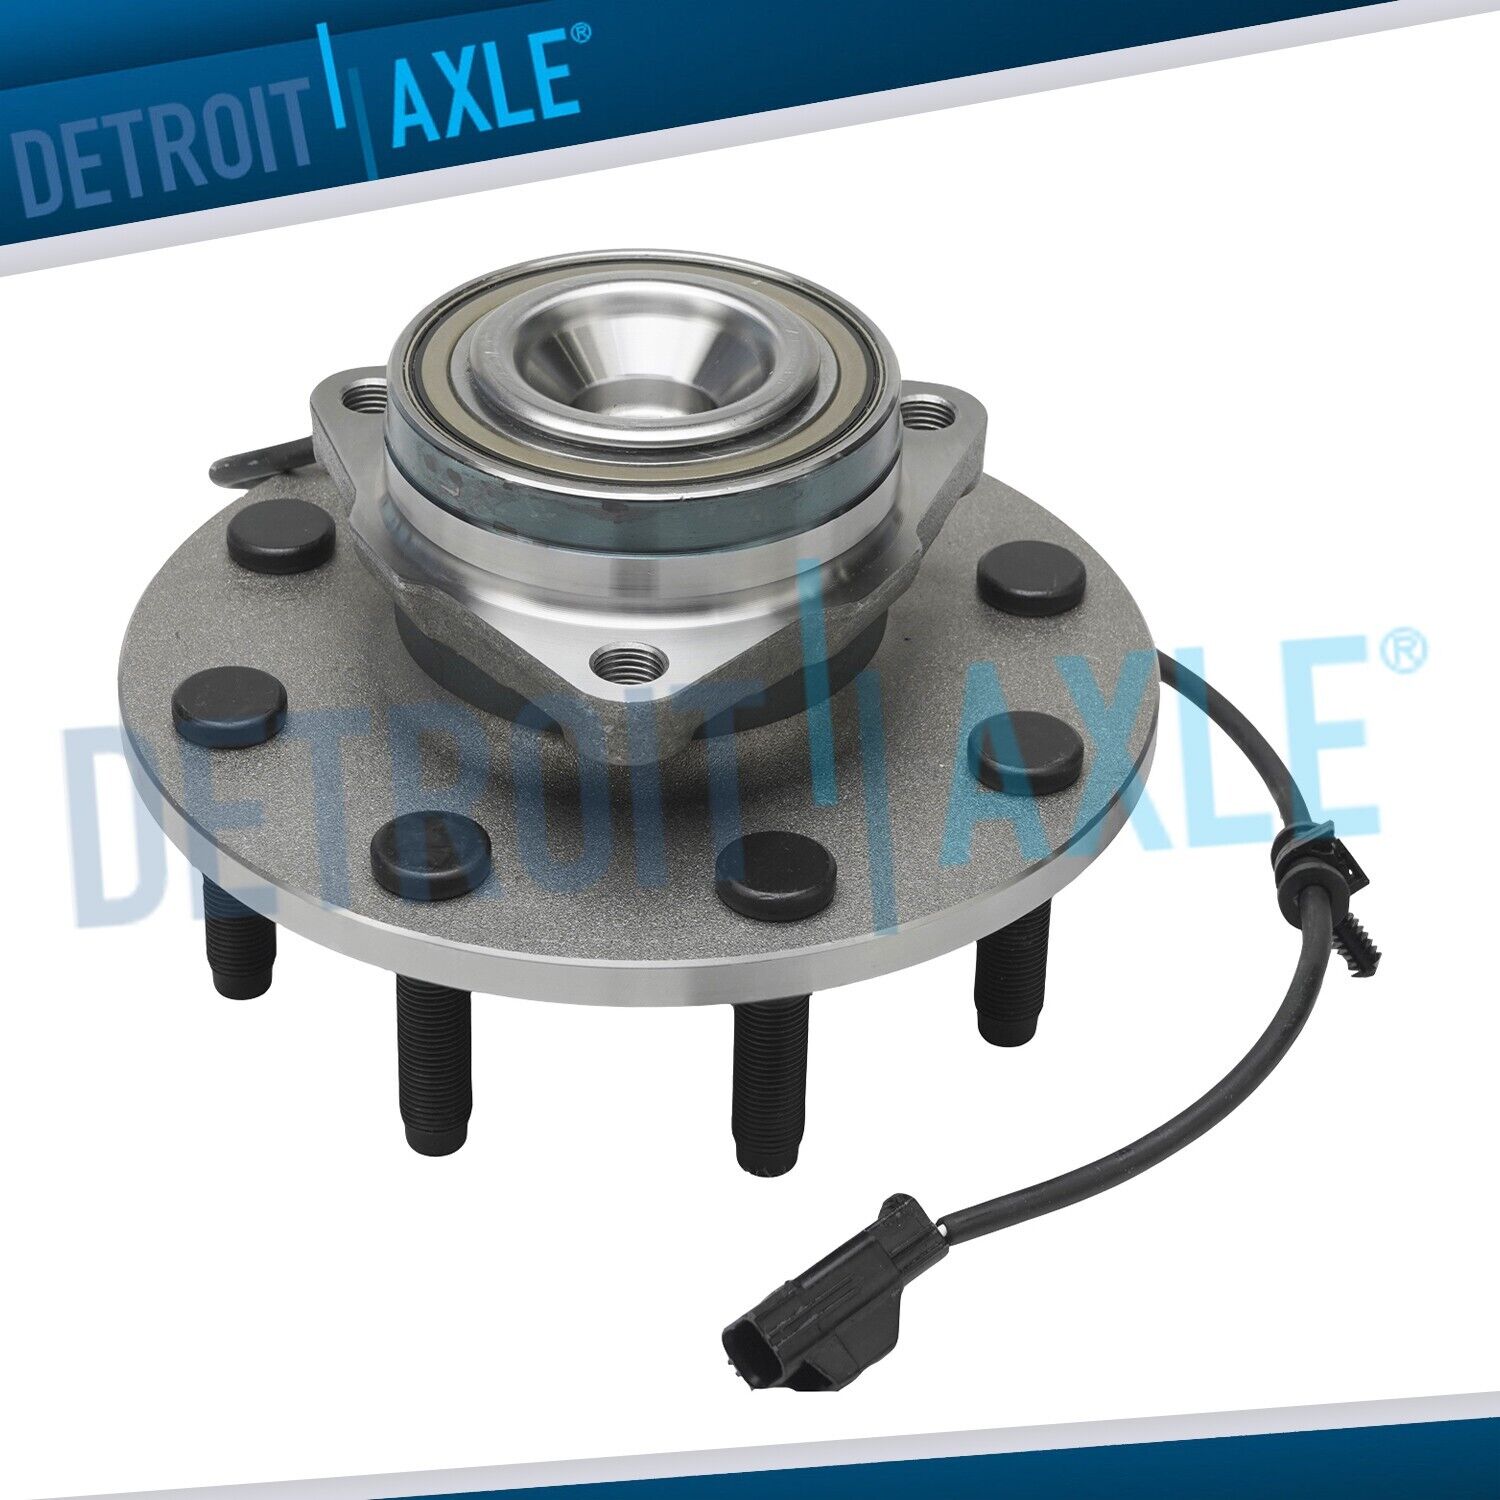 2WD Front Wheel Bearing Hub Assembly for 2003 - 2005 Dodge Ram 2500 3500 w/ABS